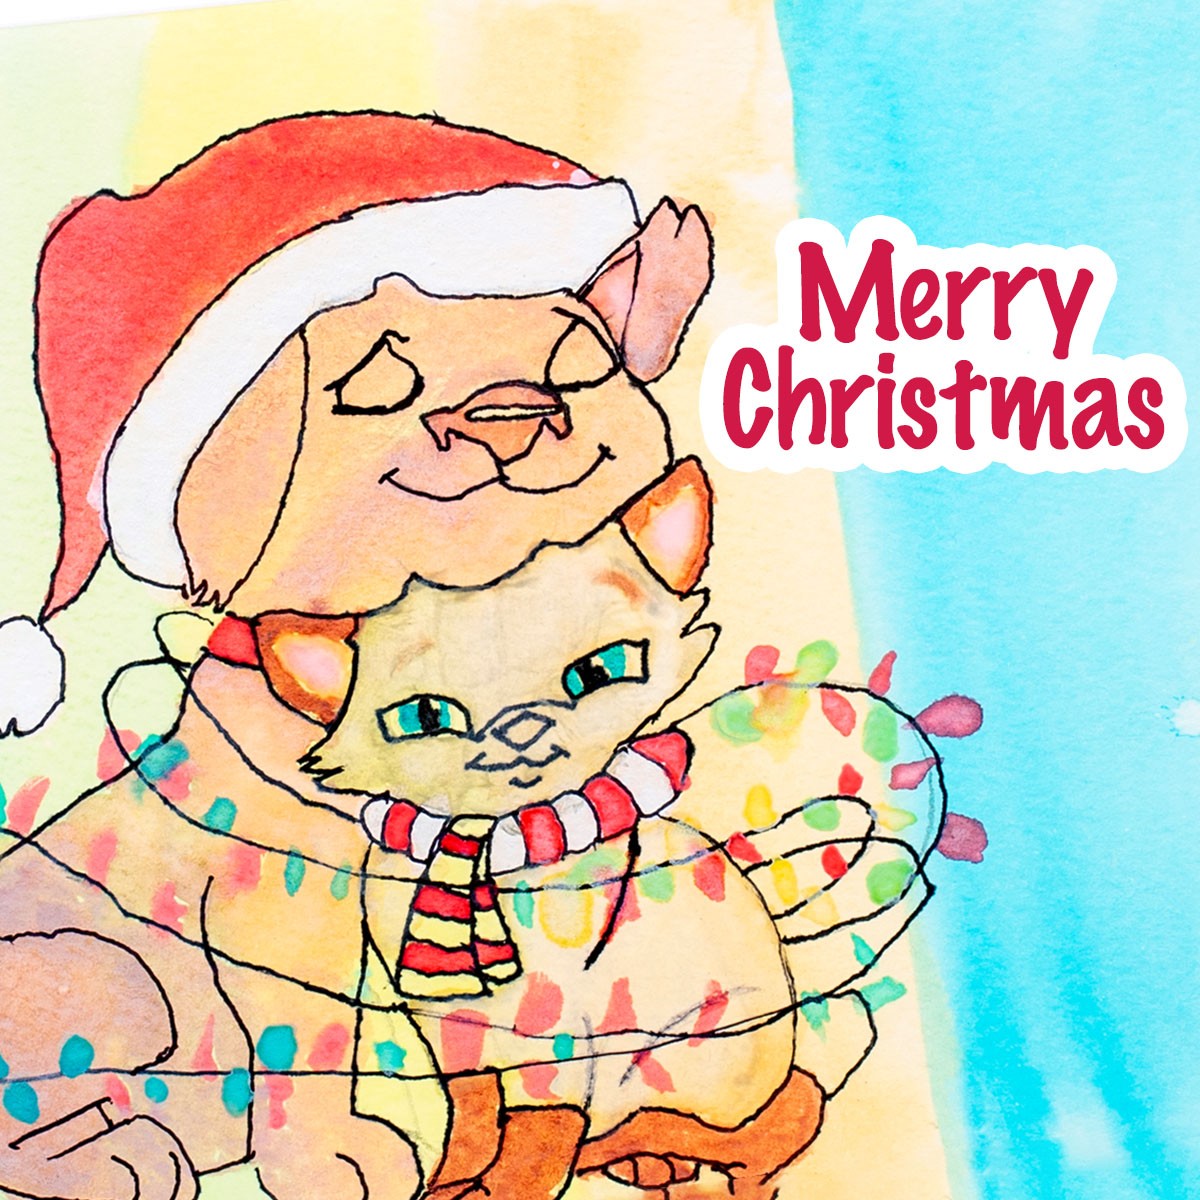 Merry Christmas card artwork of cuddling cats inspired by St. Jude patient Ty.